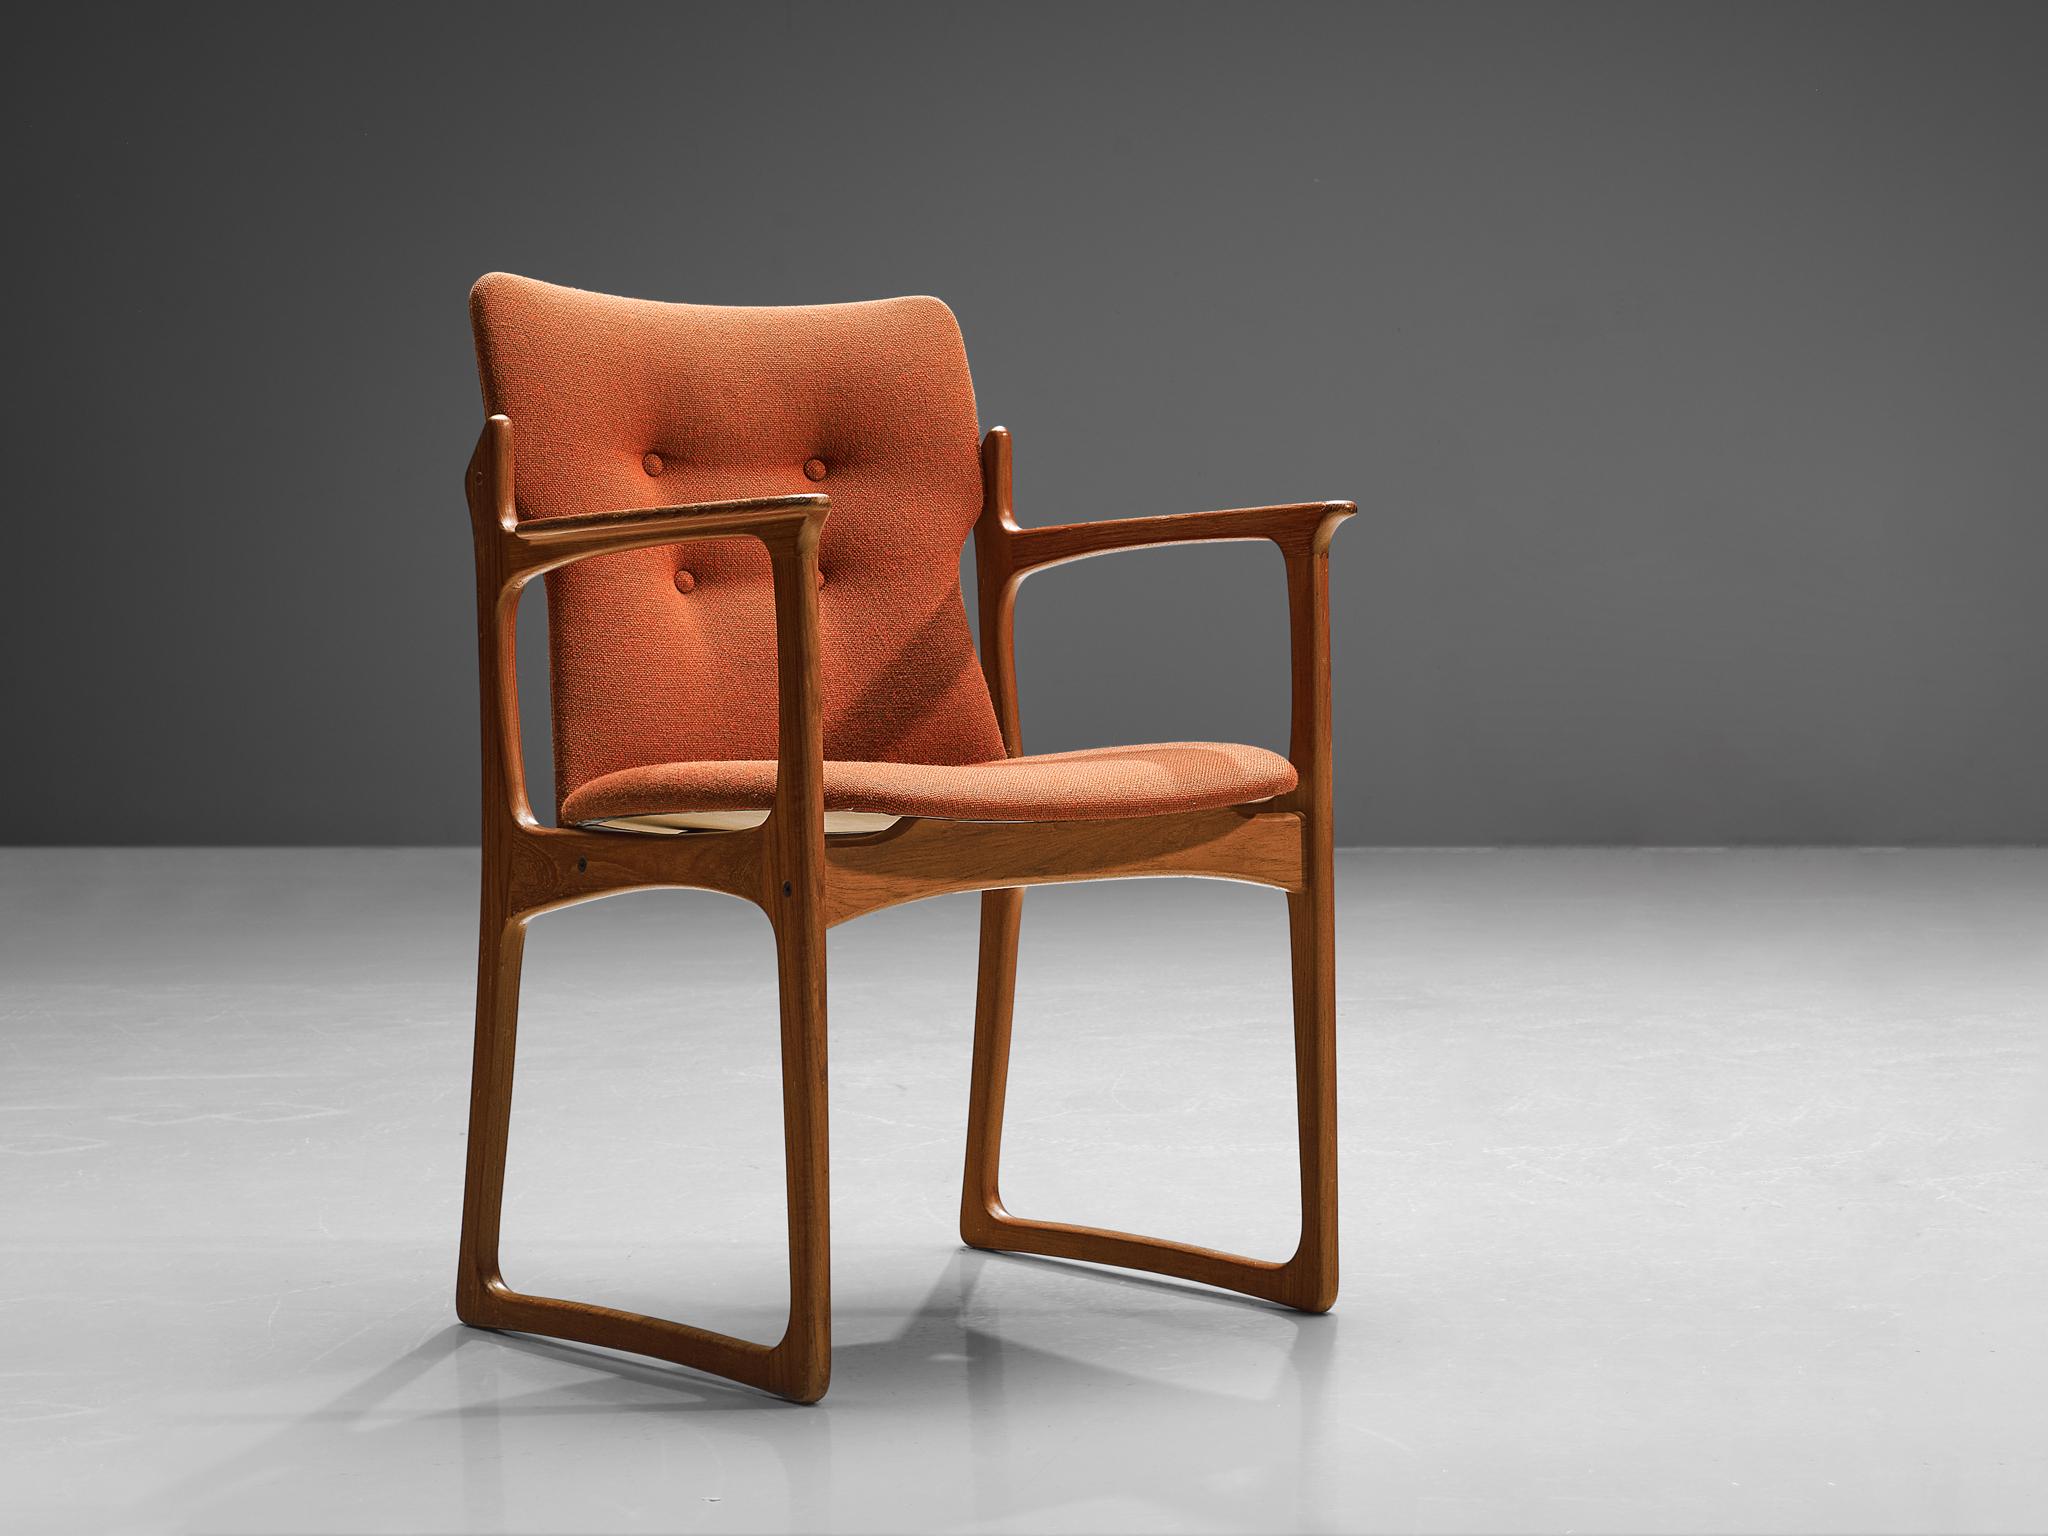 Vamdrup Stolefabrik, armchair model 'VS 231', teak and orange fabric, Denmark, 1960s. 

The armchair with a solid teak frame, raises a handsome original orange upholstery seat. The frame shows subtle lines and beautiful curves of the woodwork. The